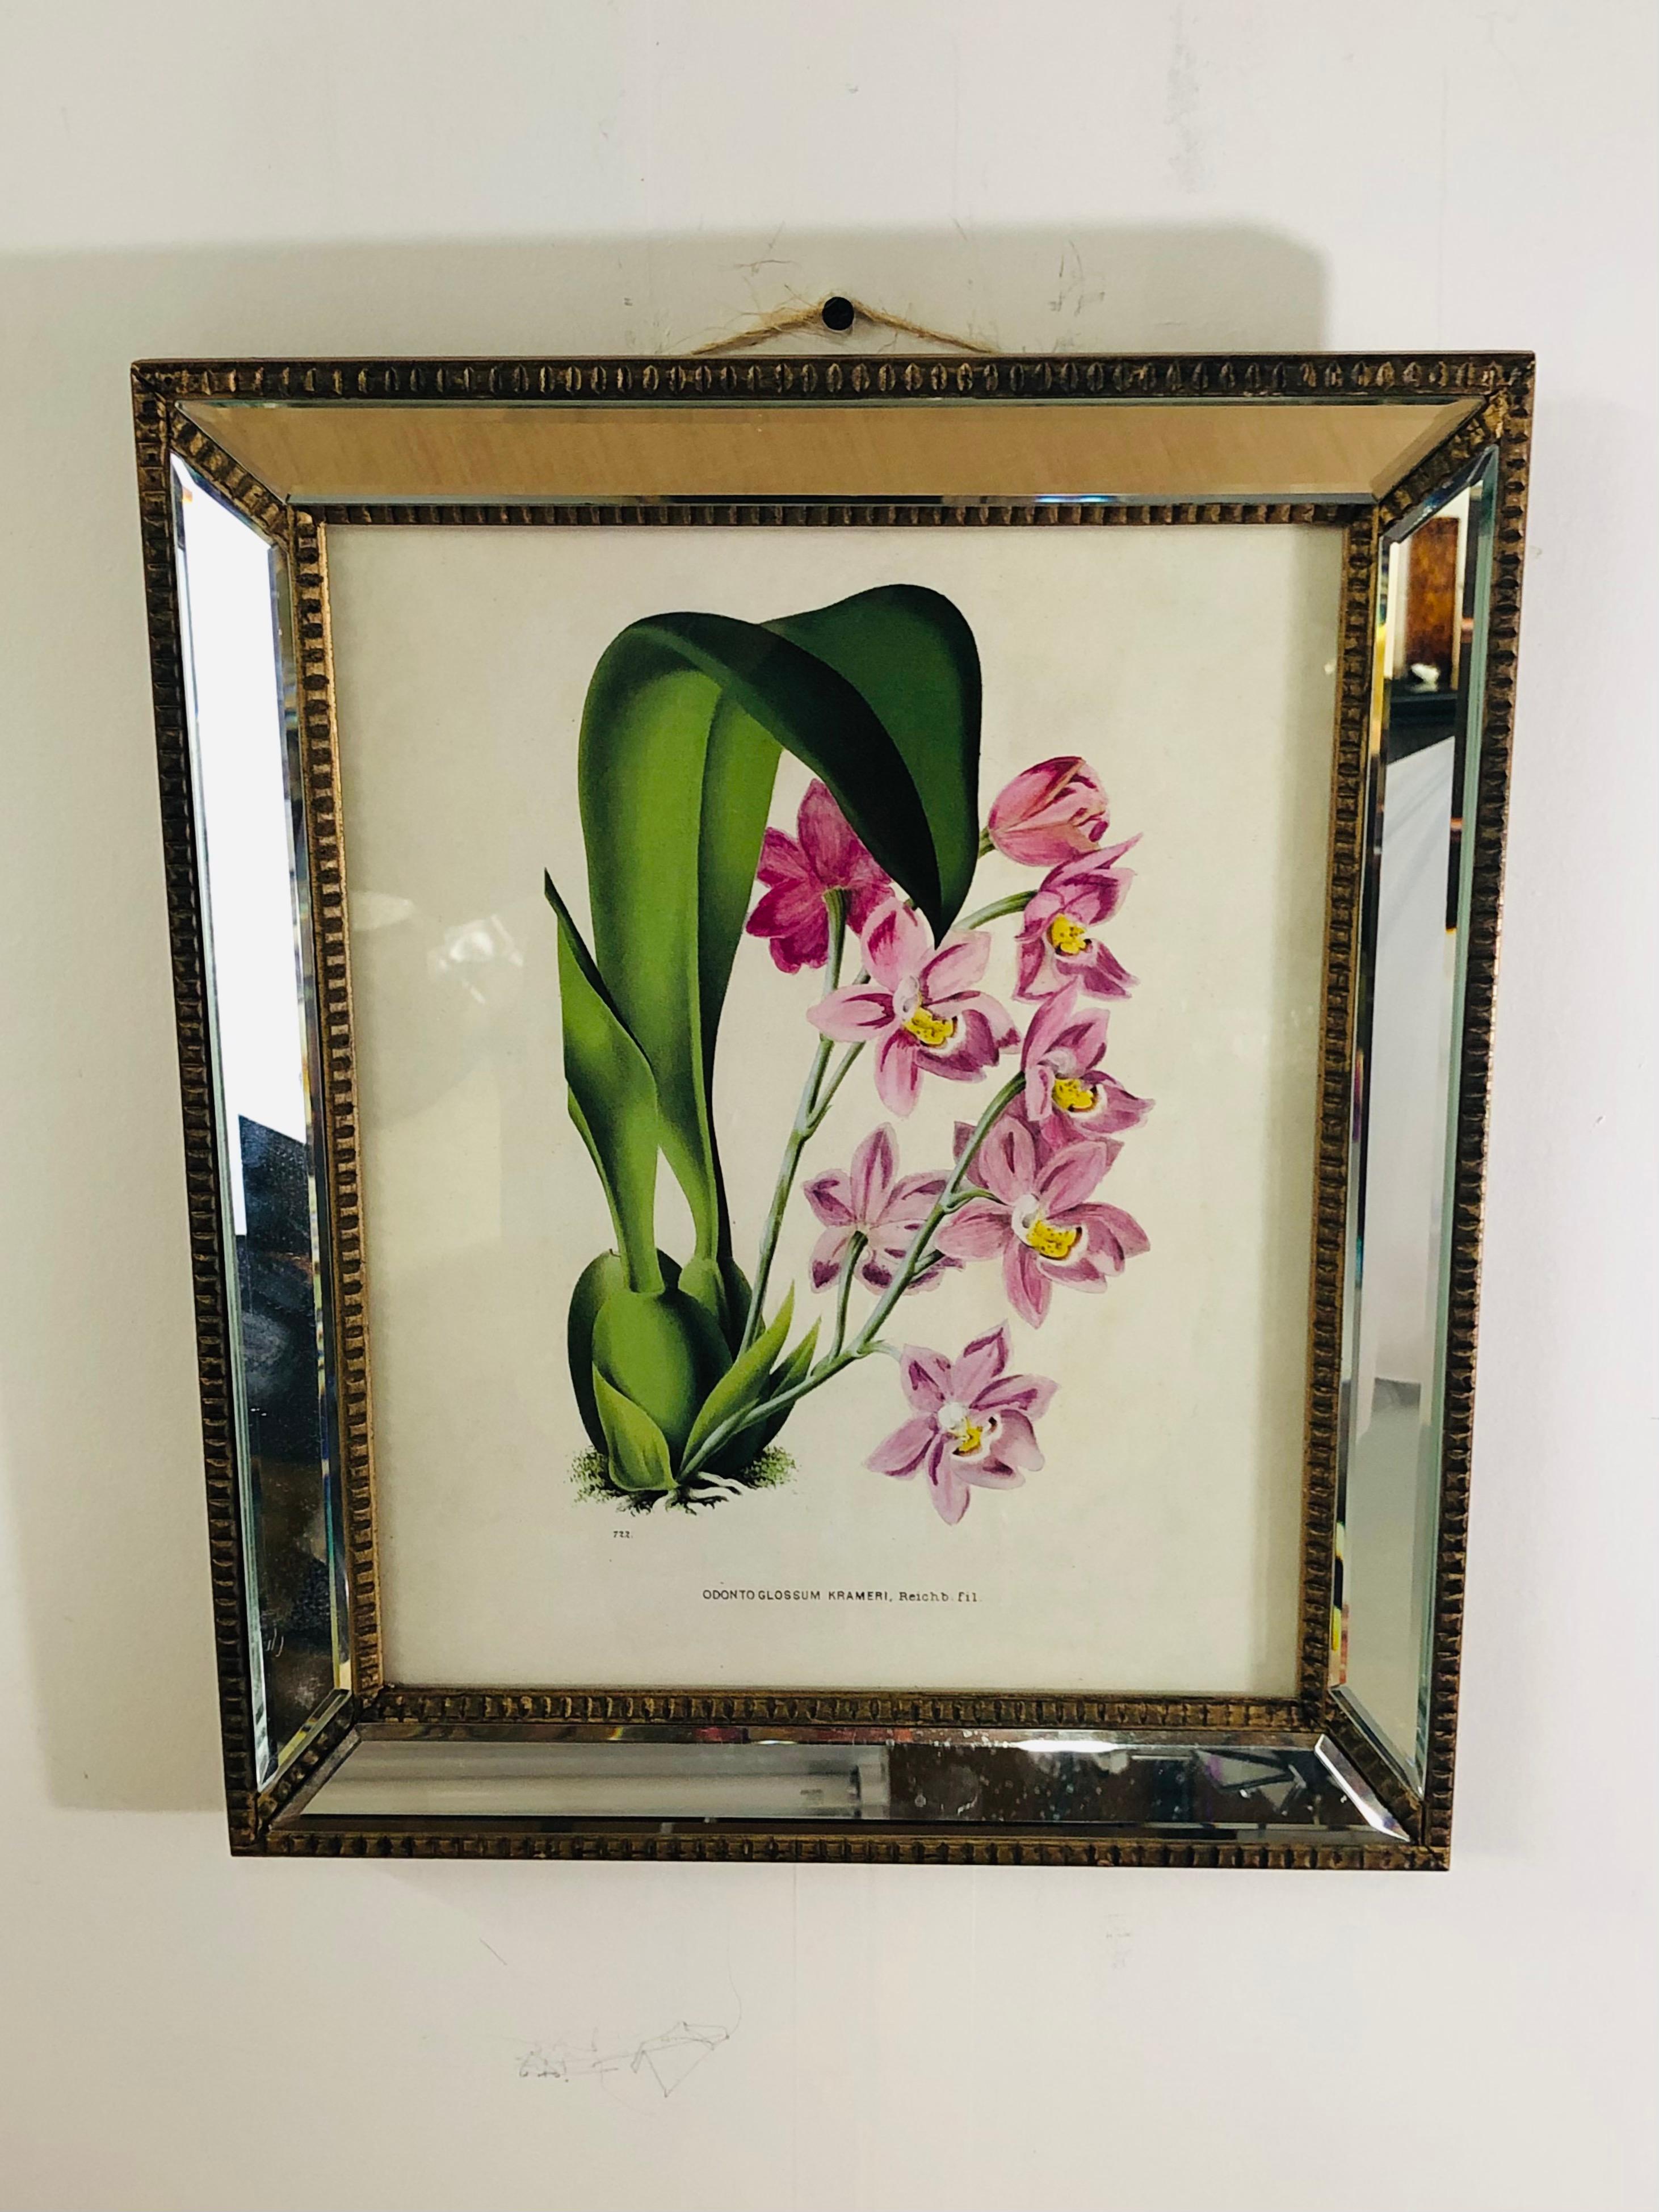 South American Botanicals of Cattleya Orchids in a Mirrored Custom Frame, Set of 6